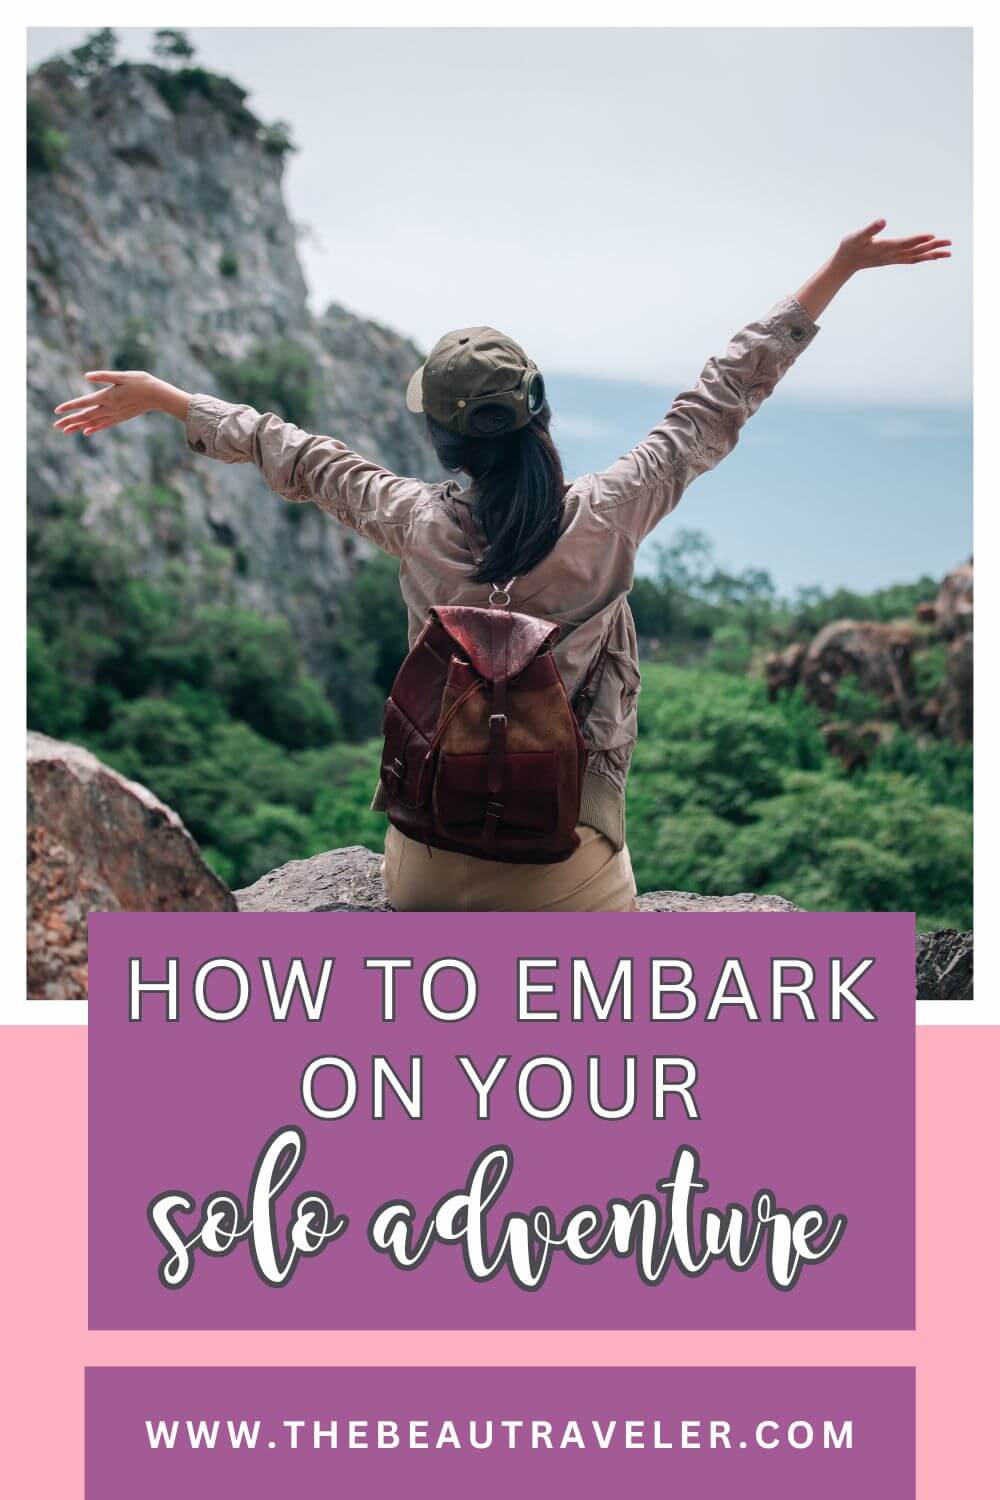 How to Embark on Your Solo Adventure: Top Tips for Students' First Solo Travel - The BeauTraveler